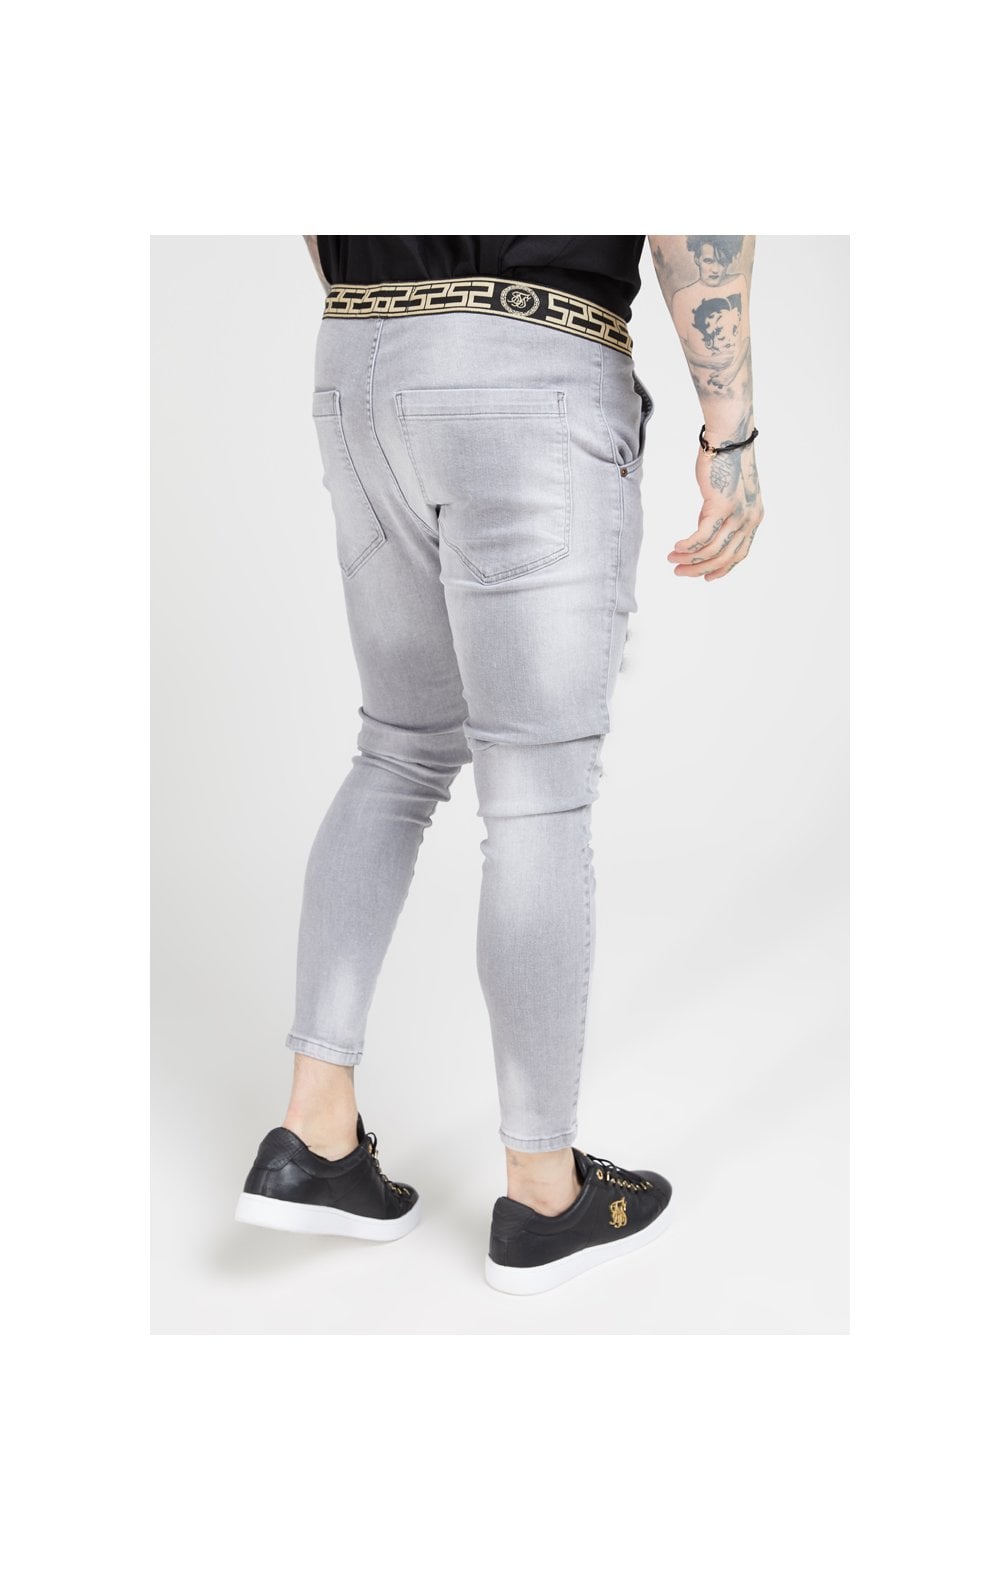 Load image into Gallery viewer, SikSilk Elasticated Waist Skinny Distressed Jeans – Washed Grey (2)